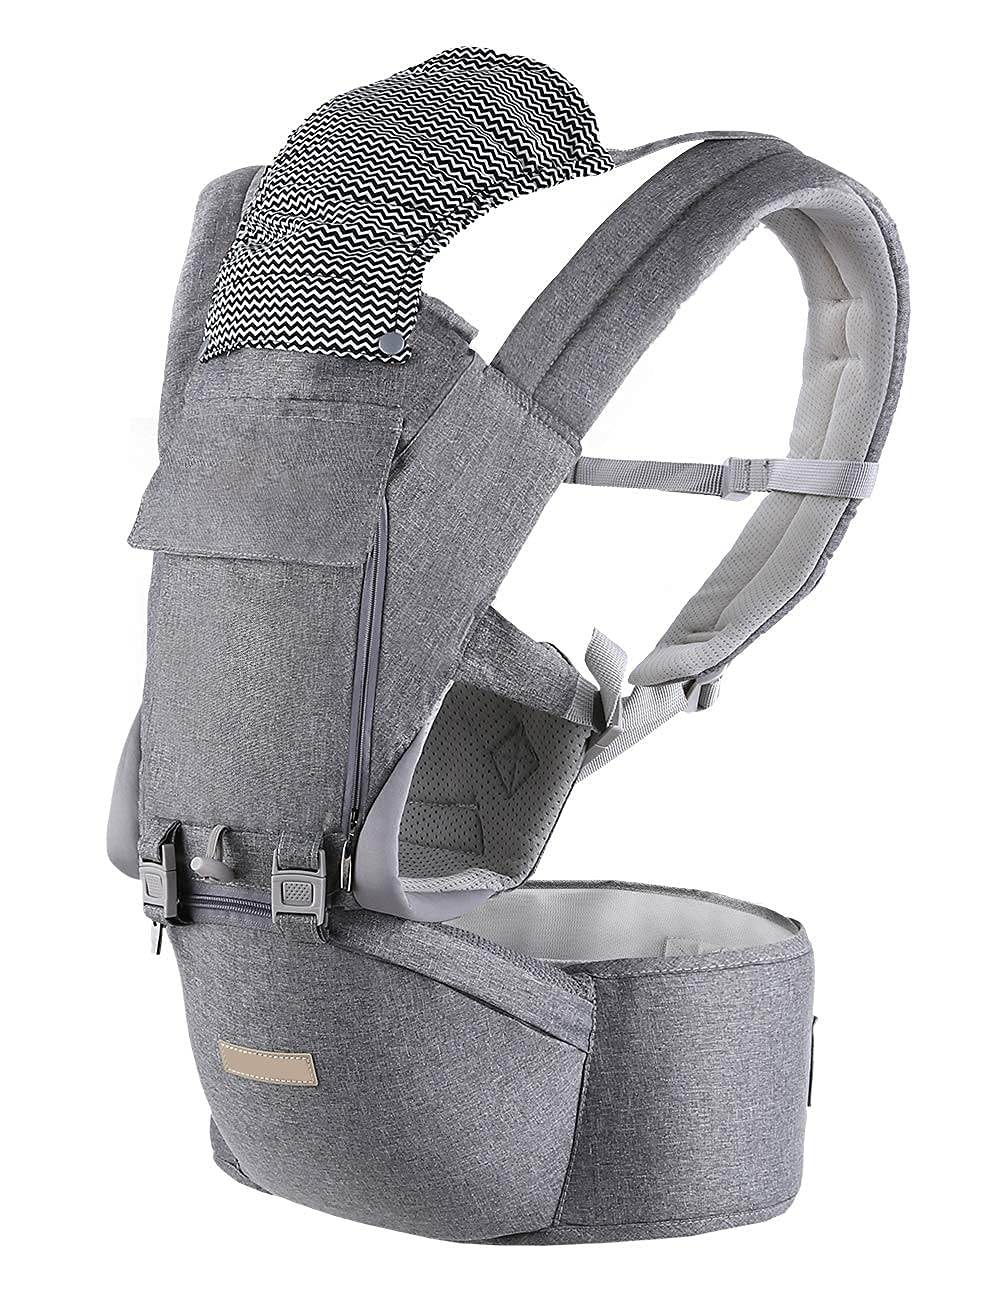 alobeby 6-in-1 Newborn to Toddler All Seasons Baby Carrier w/ Hip Seat Lumbar Support (Grey) $35 + Free Shipping